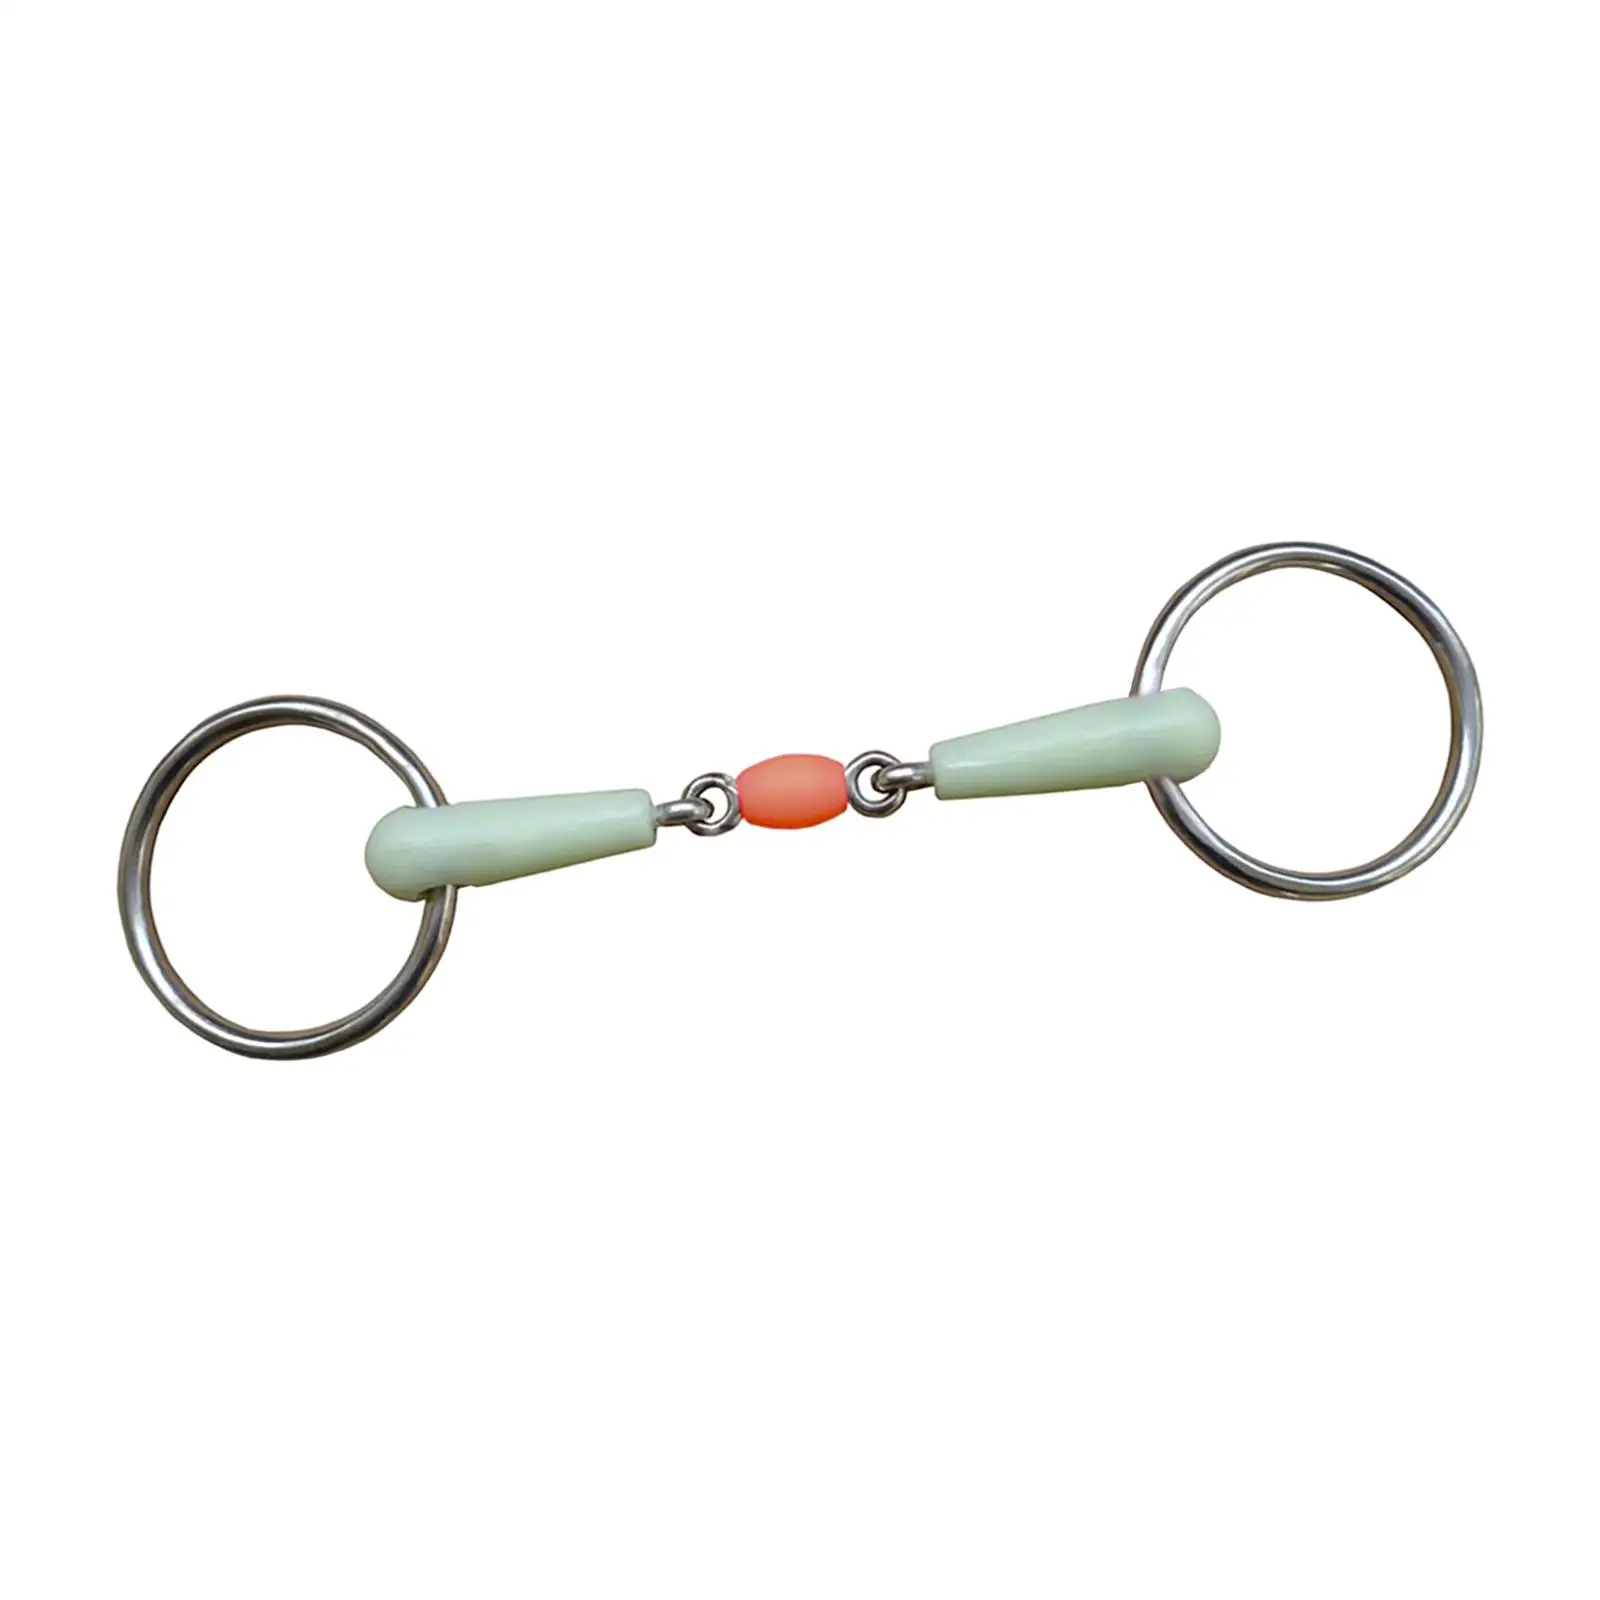 horse Mouth Bit Comfort Round Hollow Link Supplies Horse Bit Equine for Equipment Performance Equestrian Horse Chewing